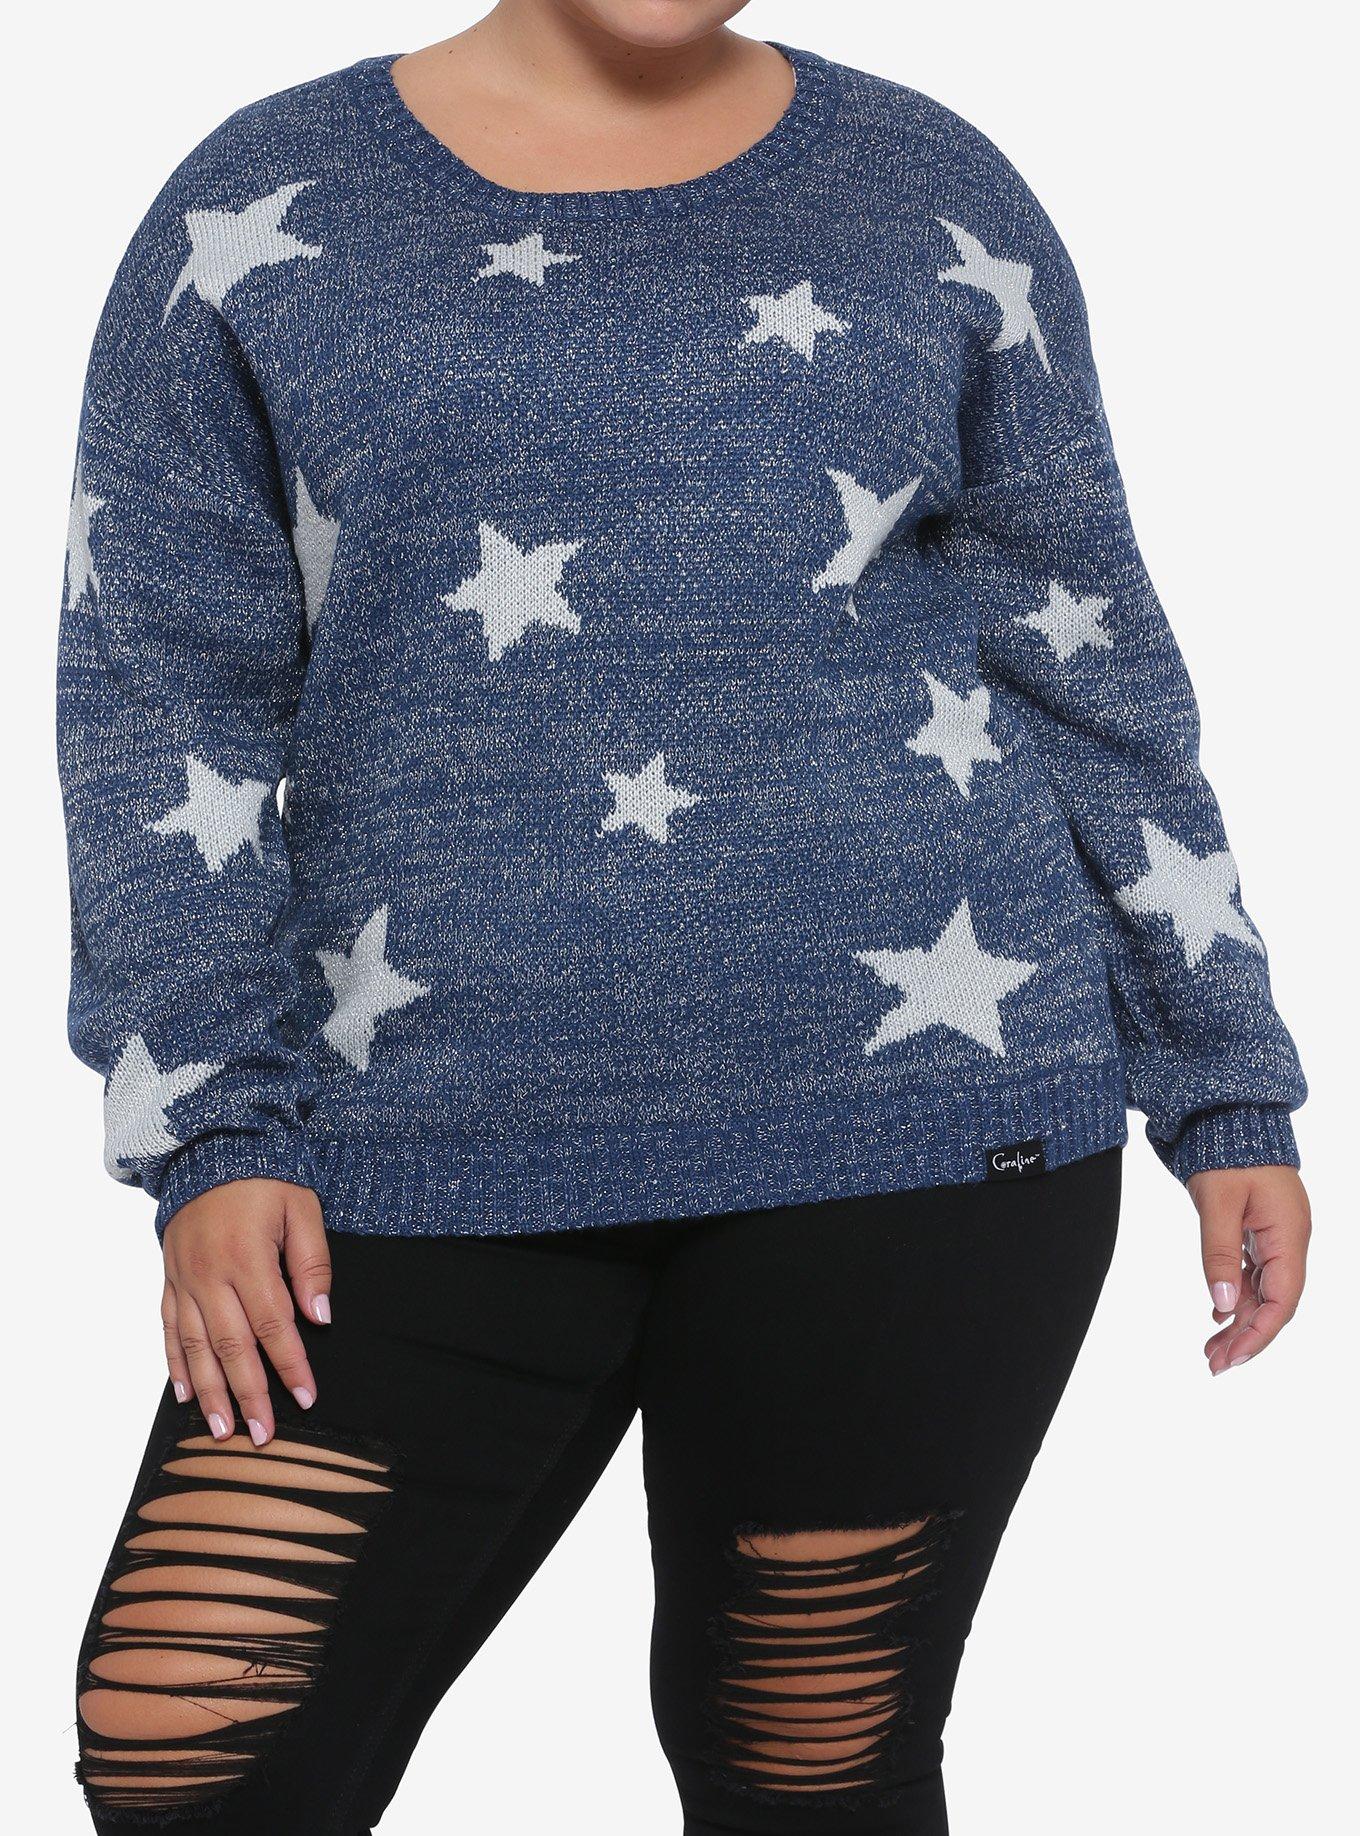 Coraline Silver Star Girls Sweater Plus Size, SILVER, hi-res